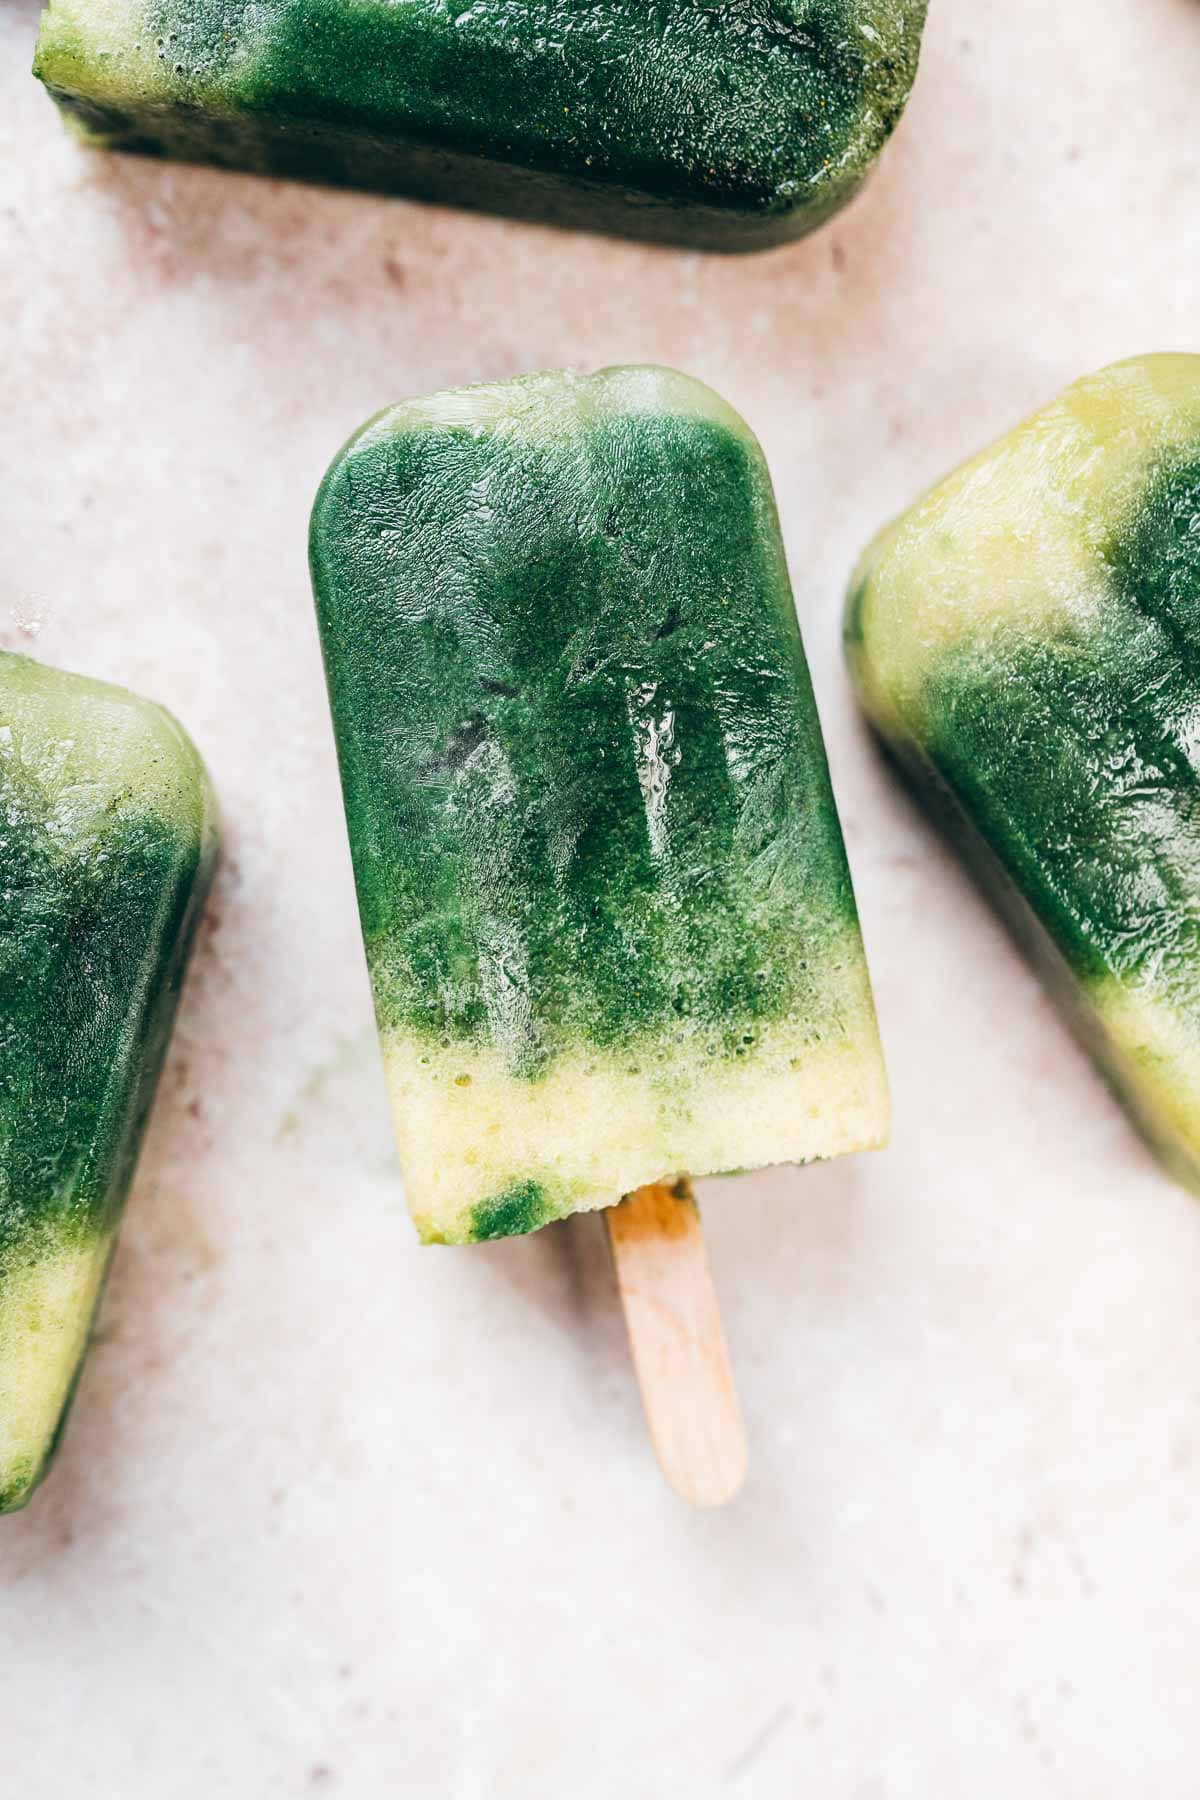 Homemade green and yellow ice pops rest on a tan table.